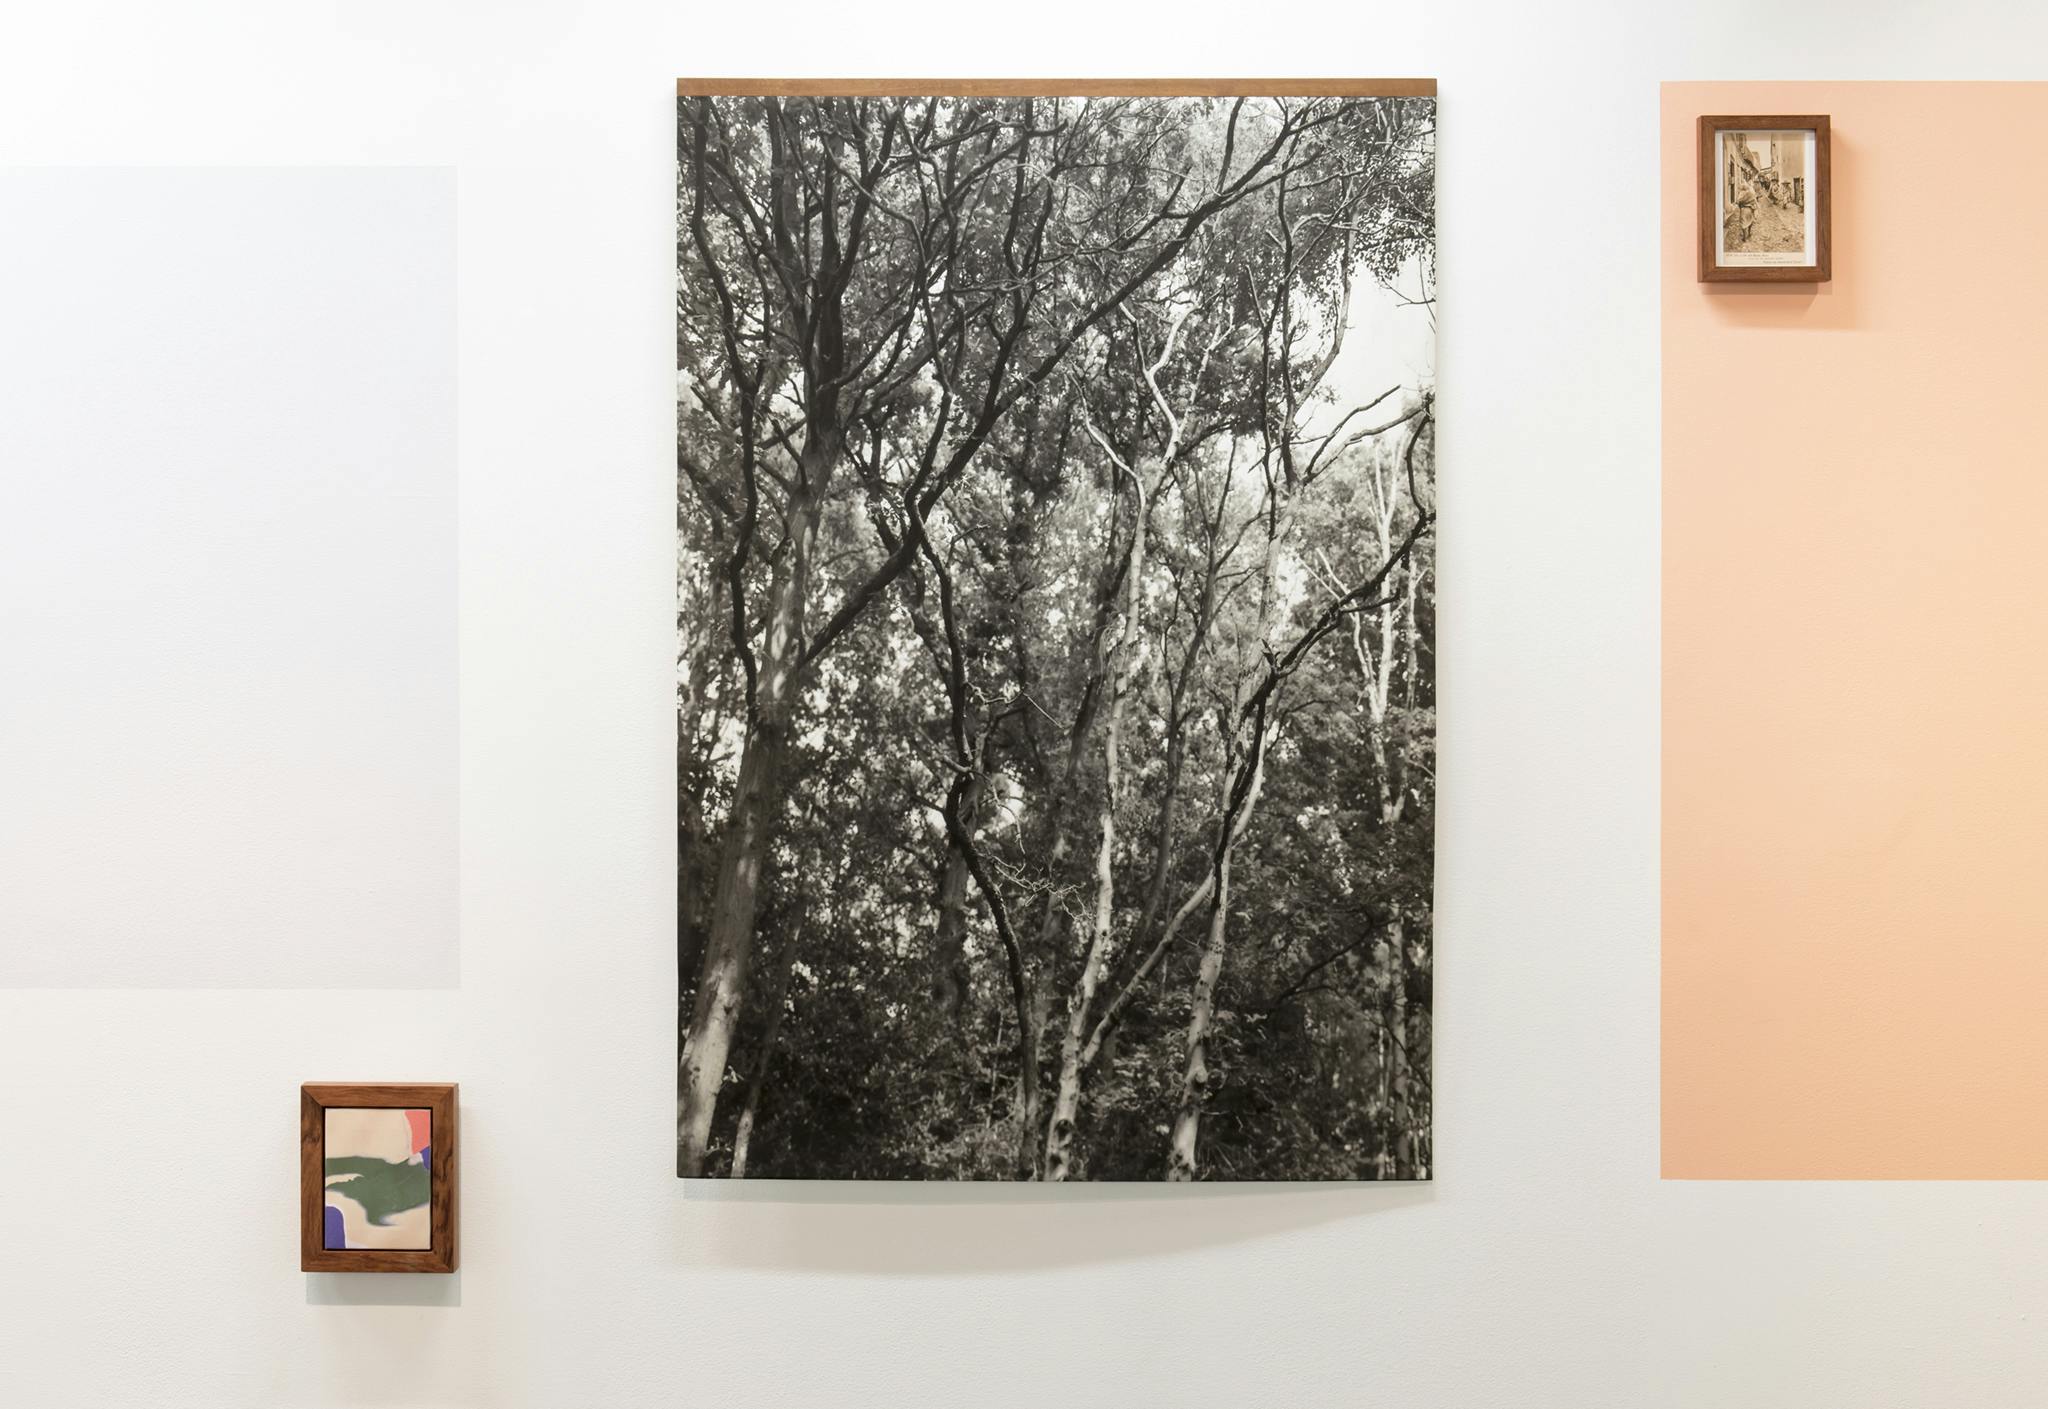 An installation image of Grace Ndiritu's work mounted on a wall. It is a black and white photograph capturing a forest. 